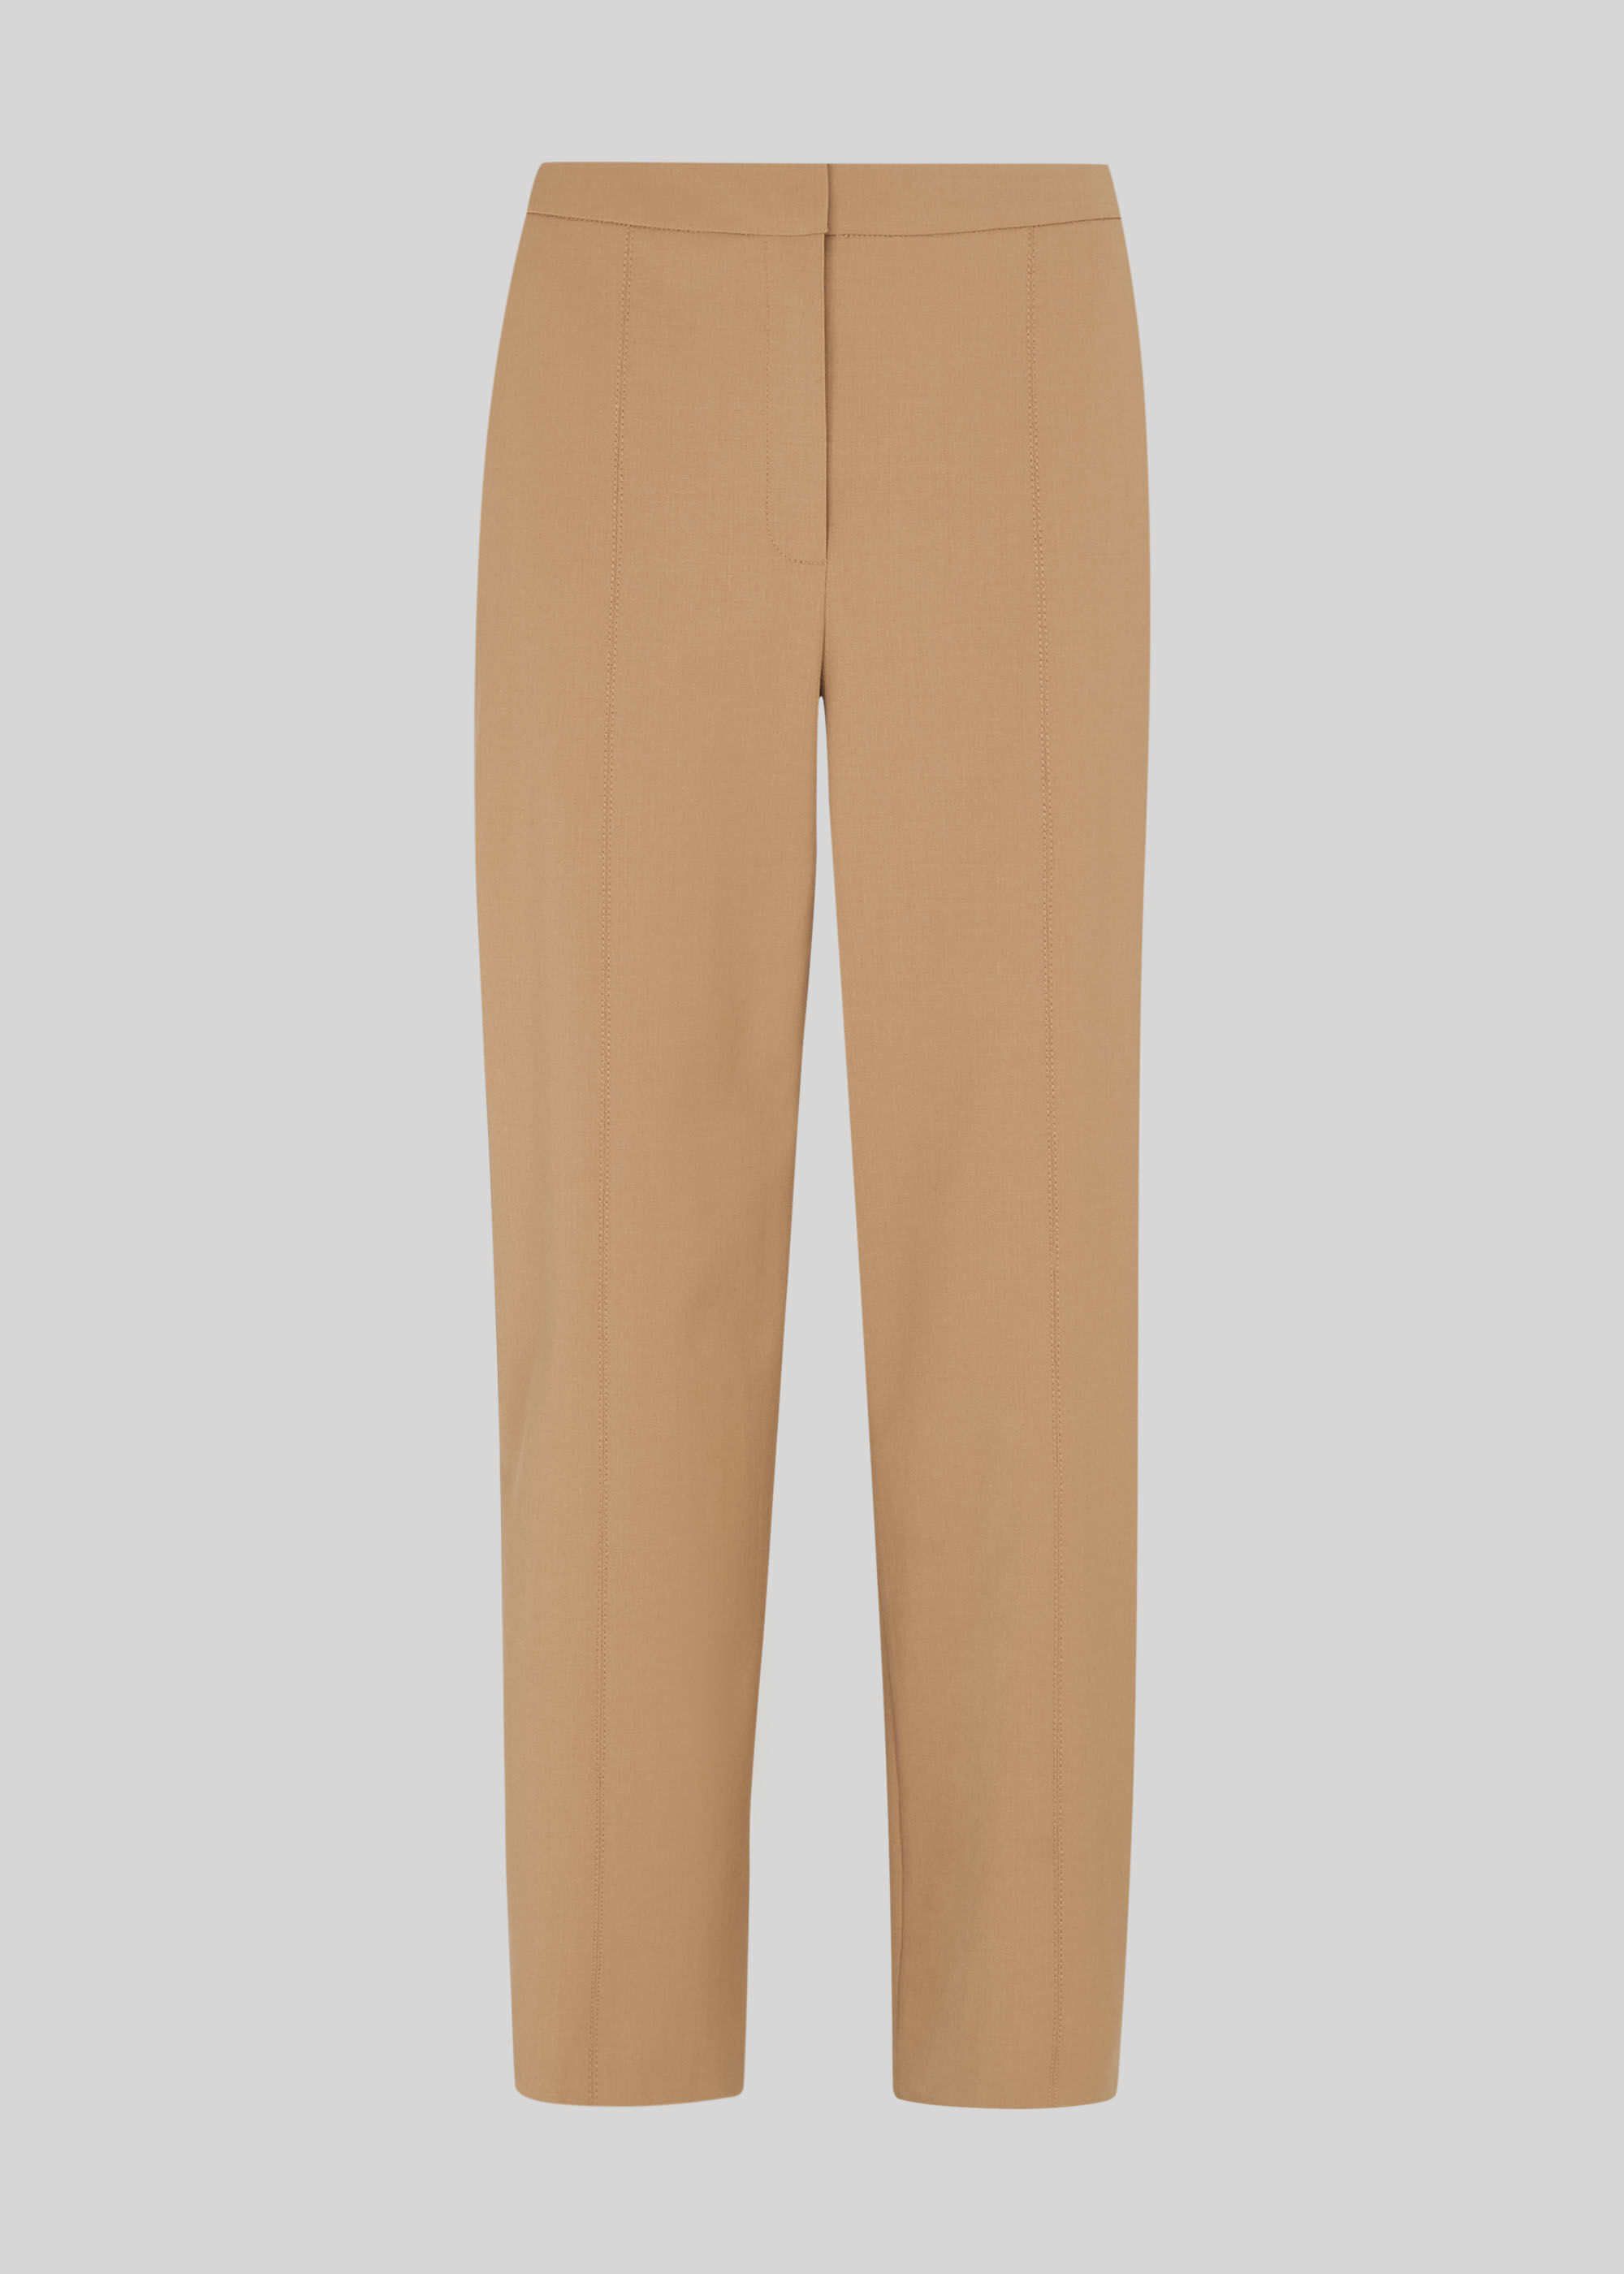 Tapered Fit Pants in Camel